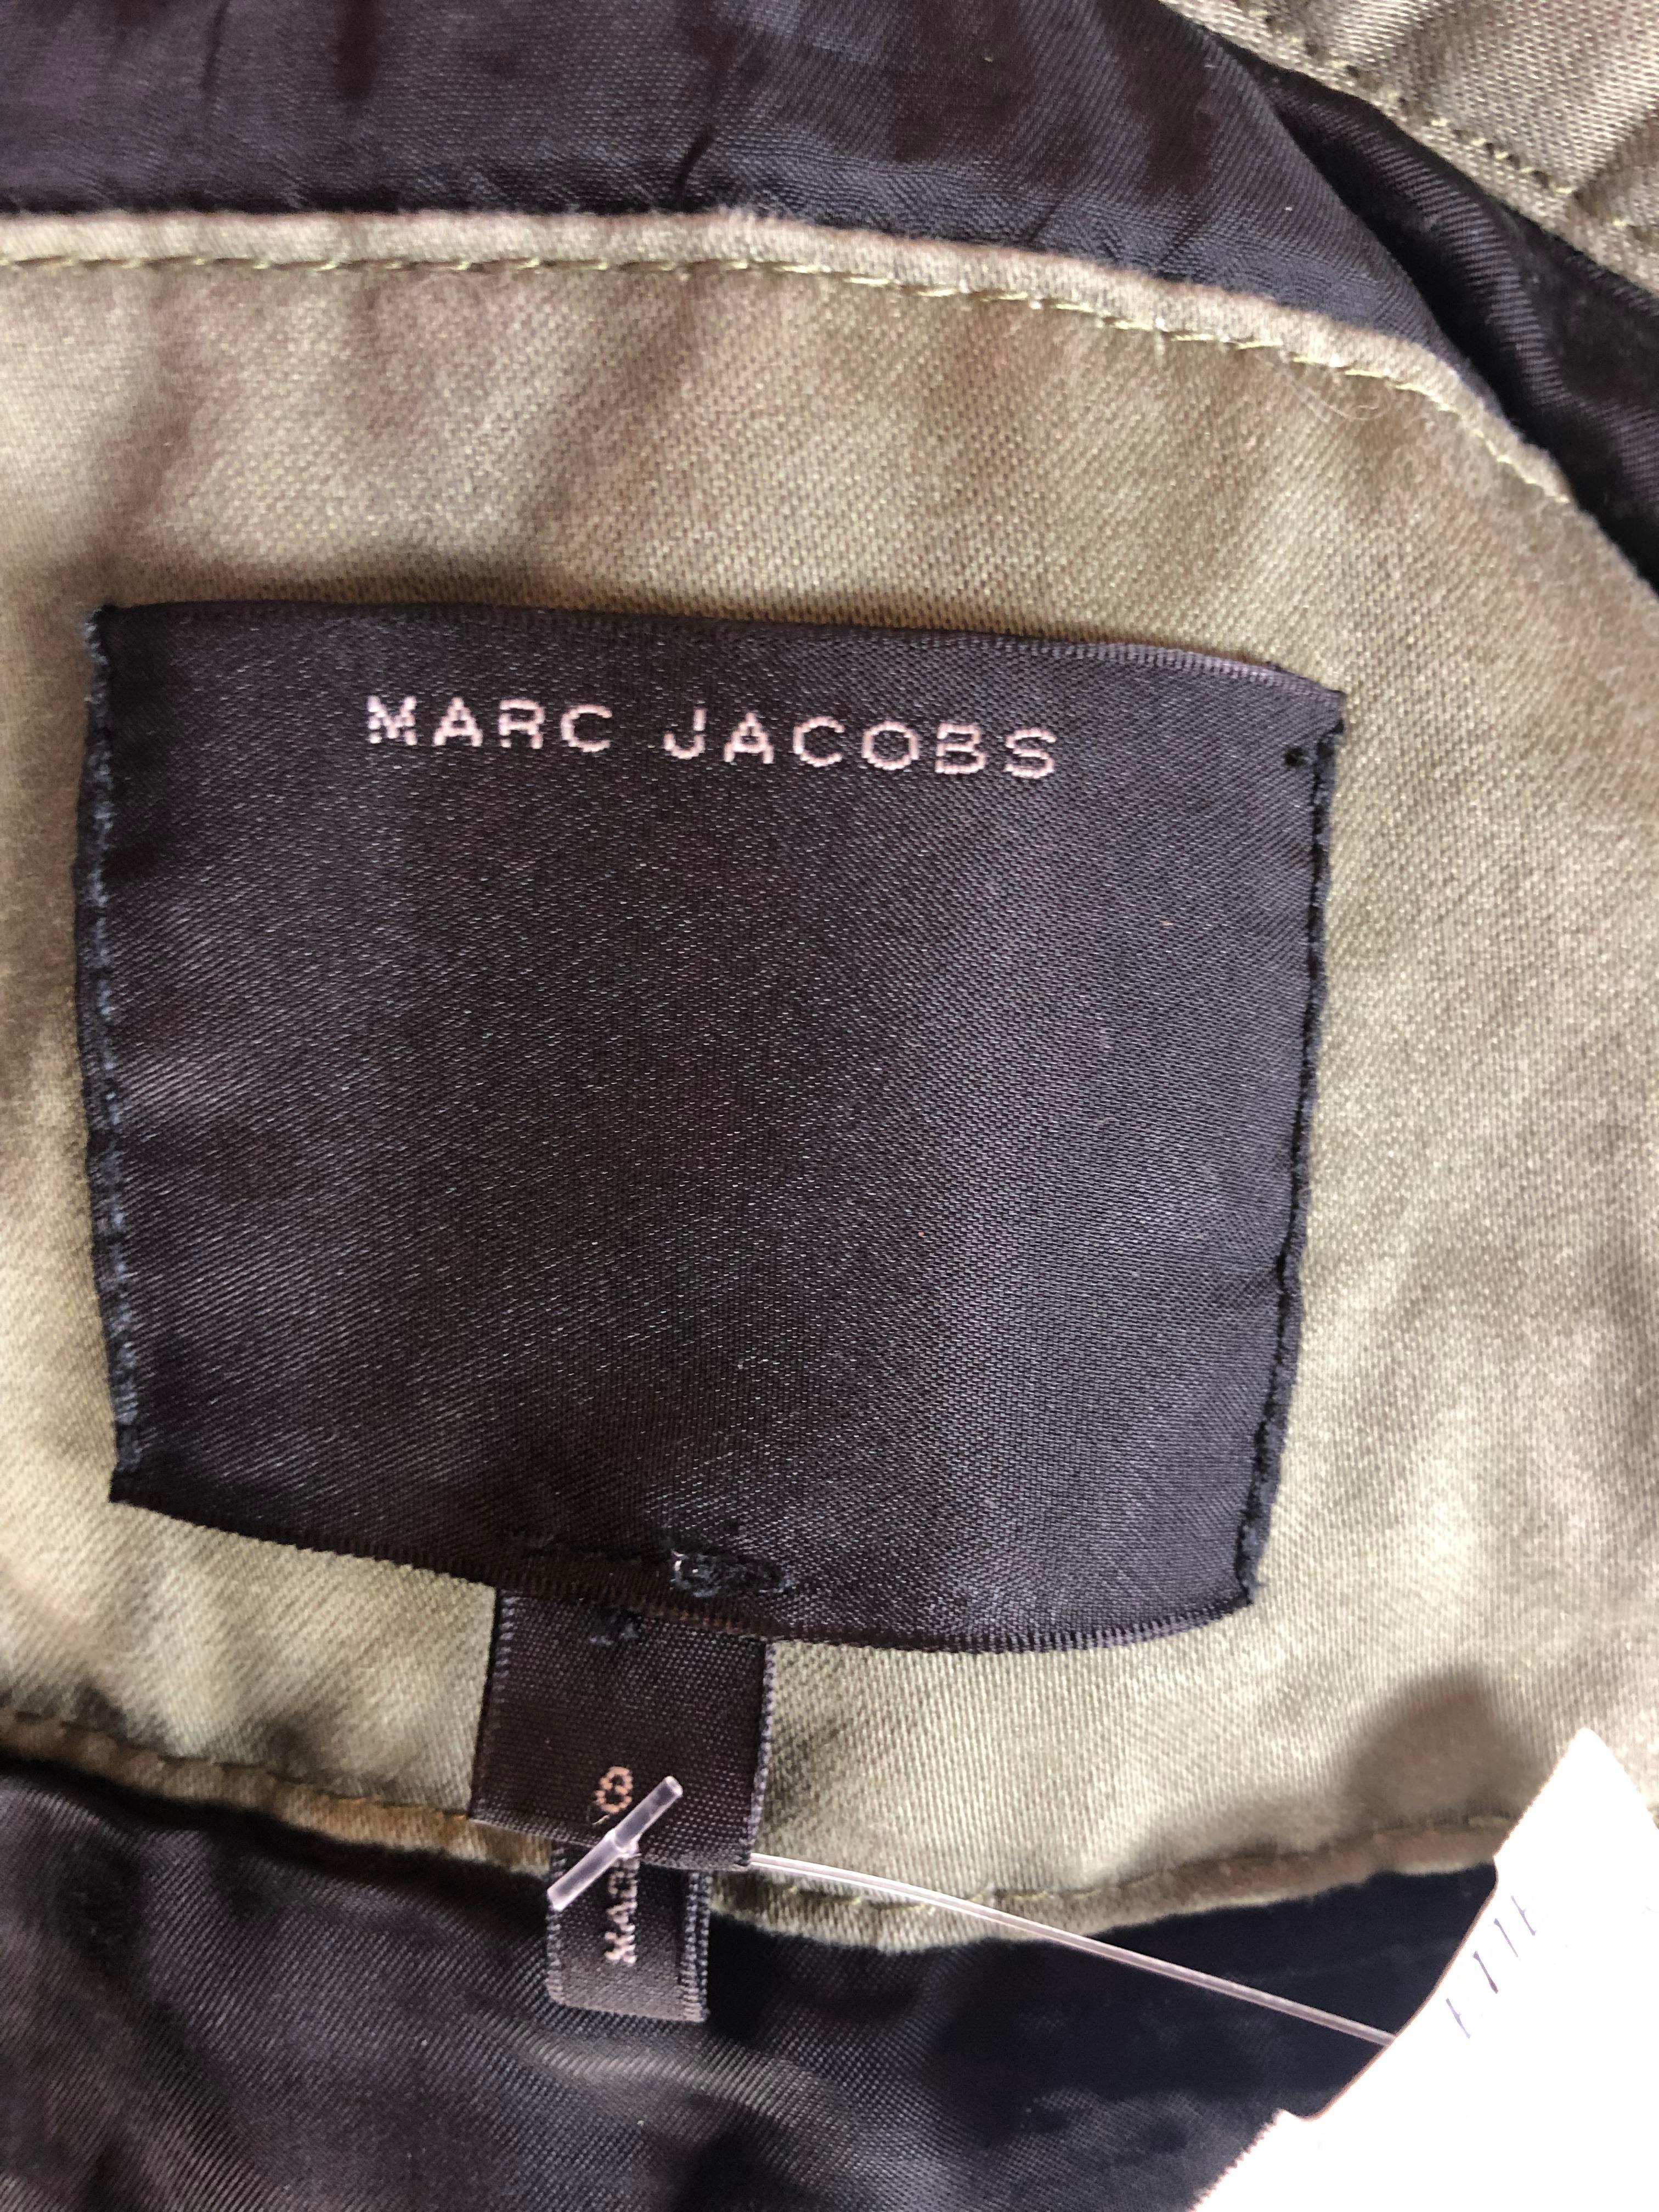 Marc Jacobs Military Style Jacket  6